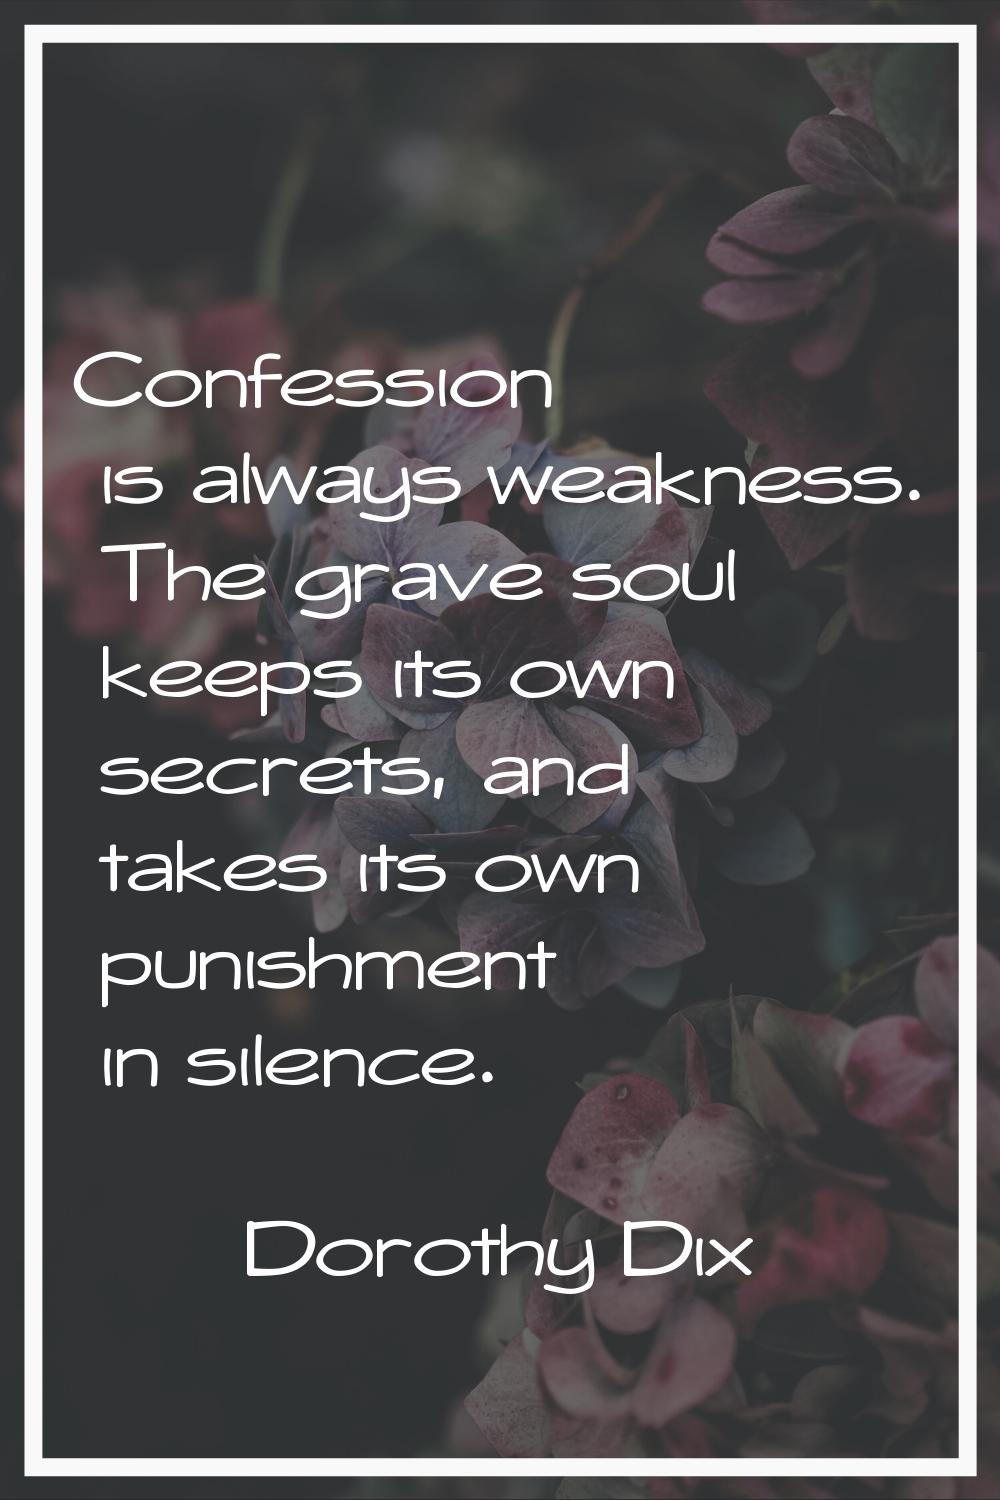 Confession is always weakness. The grave soul keeps its own secrets, and takes its own punishment i